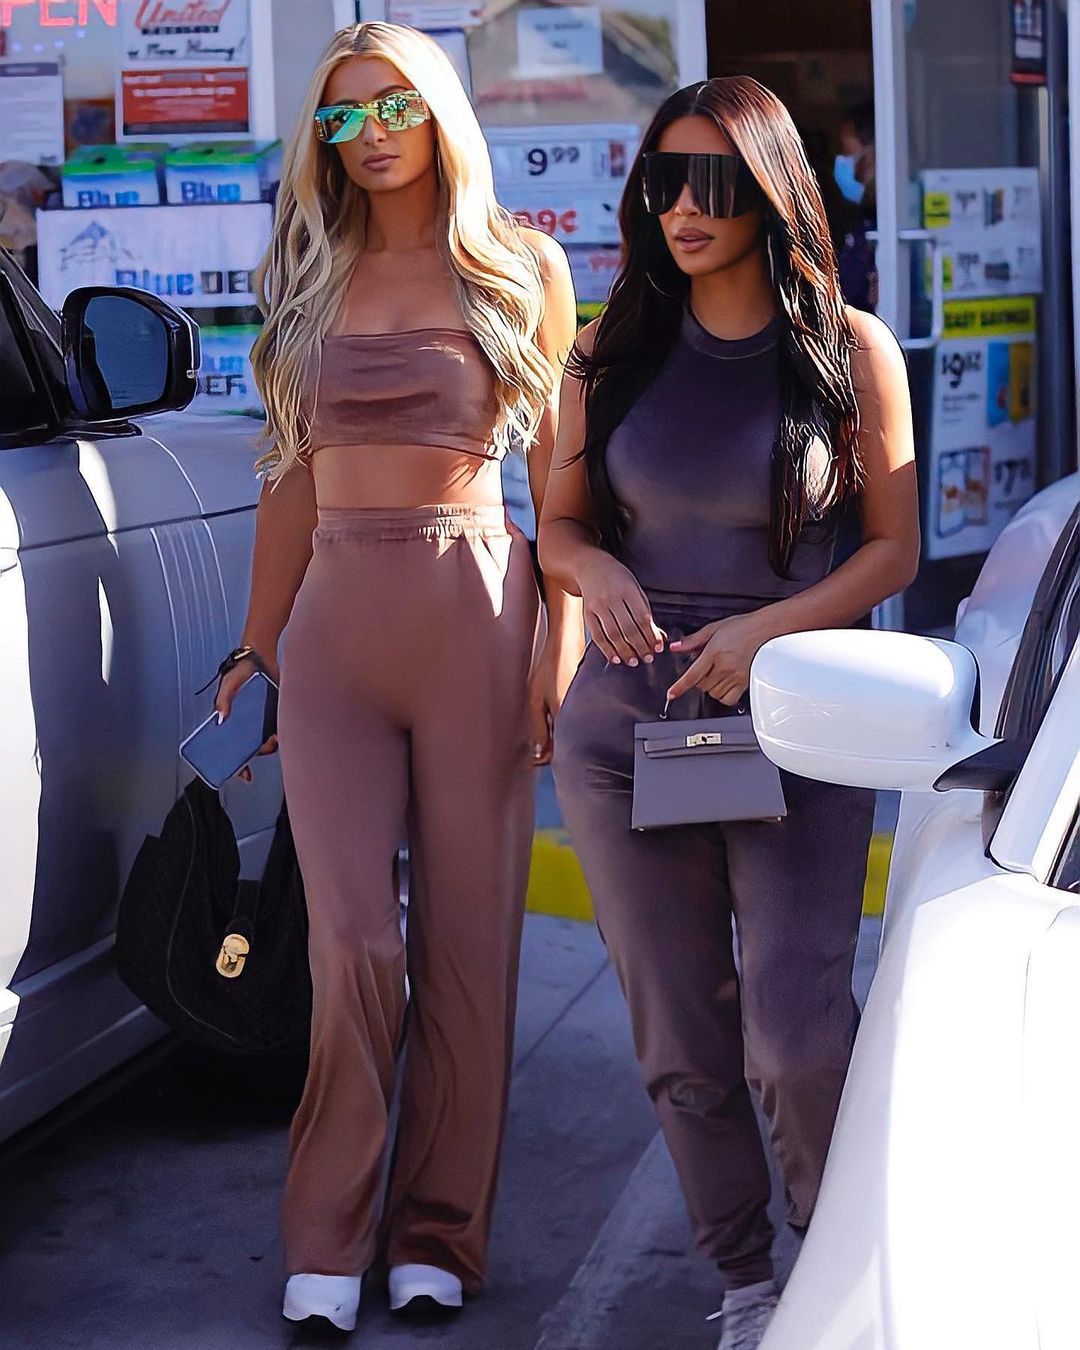 The Secret Diary of a 90's Girl — Paris & Kim recreating some of their  iconic looks